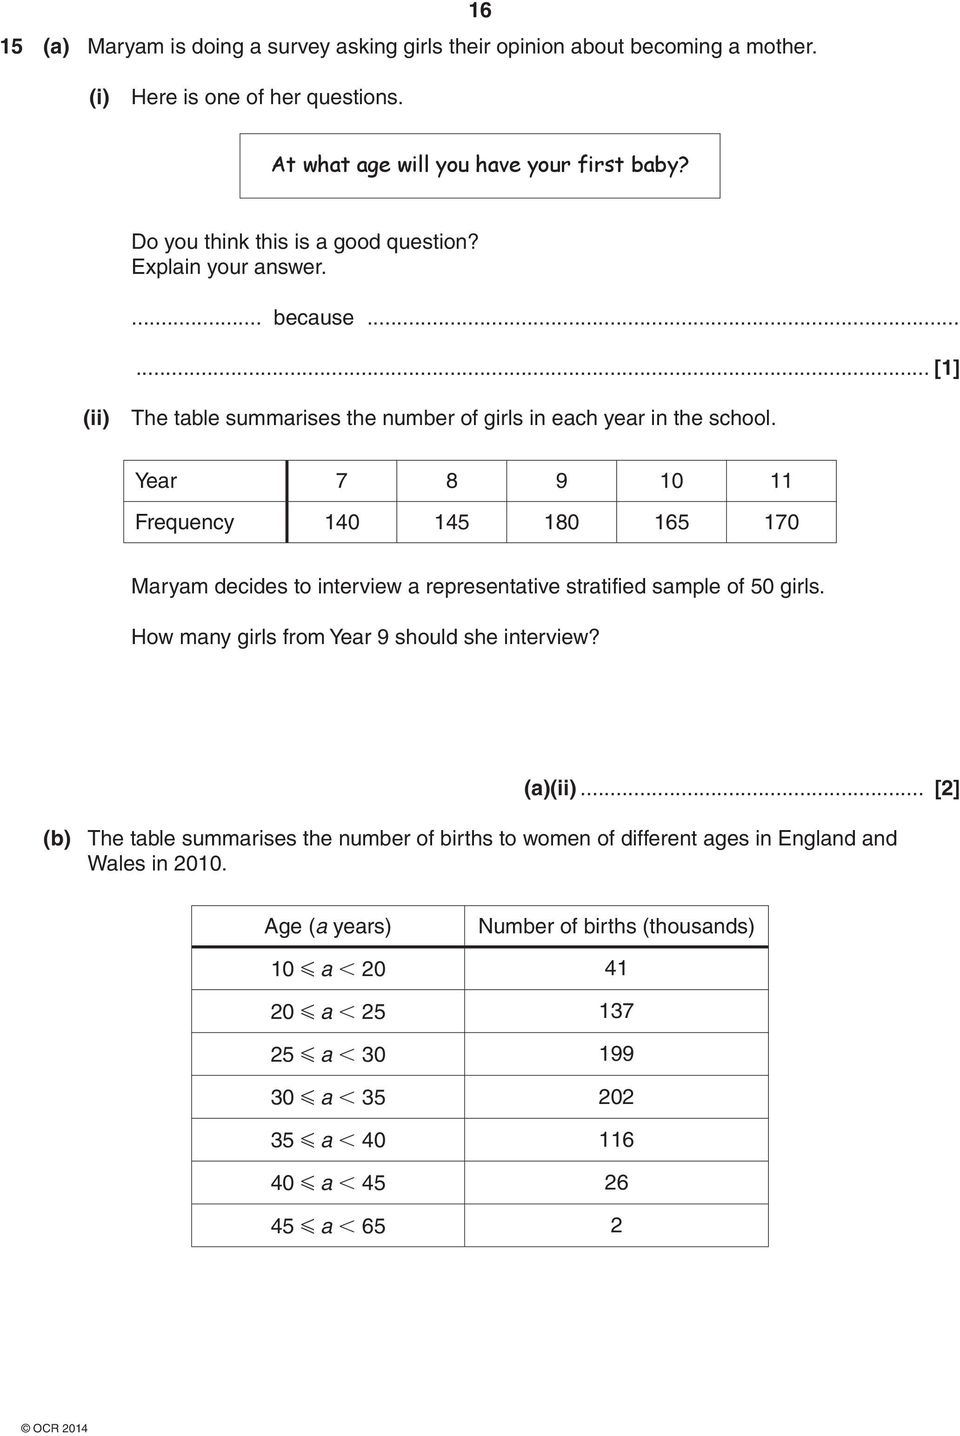 Year 7 8 9 10 11 Frequency 140 145 180 165 170 Maryam decides to interview a representative stratified sample of 50 girls. How many girls from Year 9 should she interview? (a)(ii).